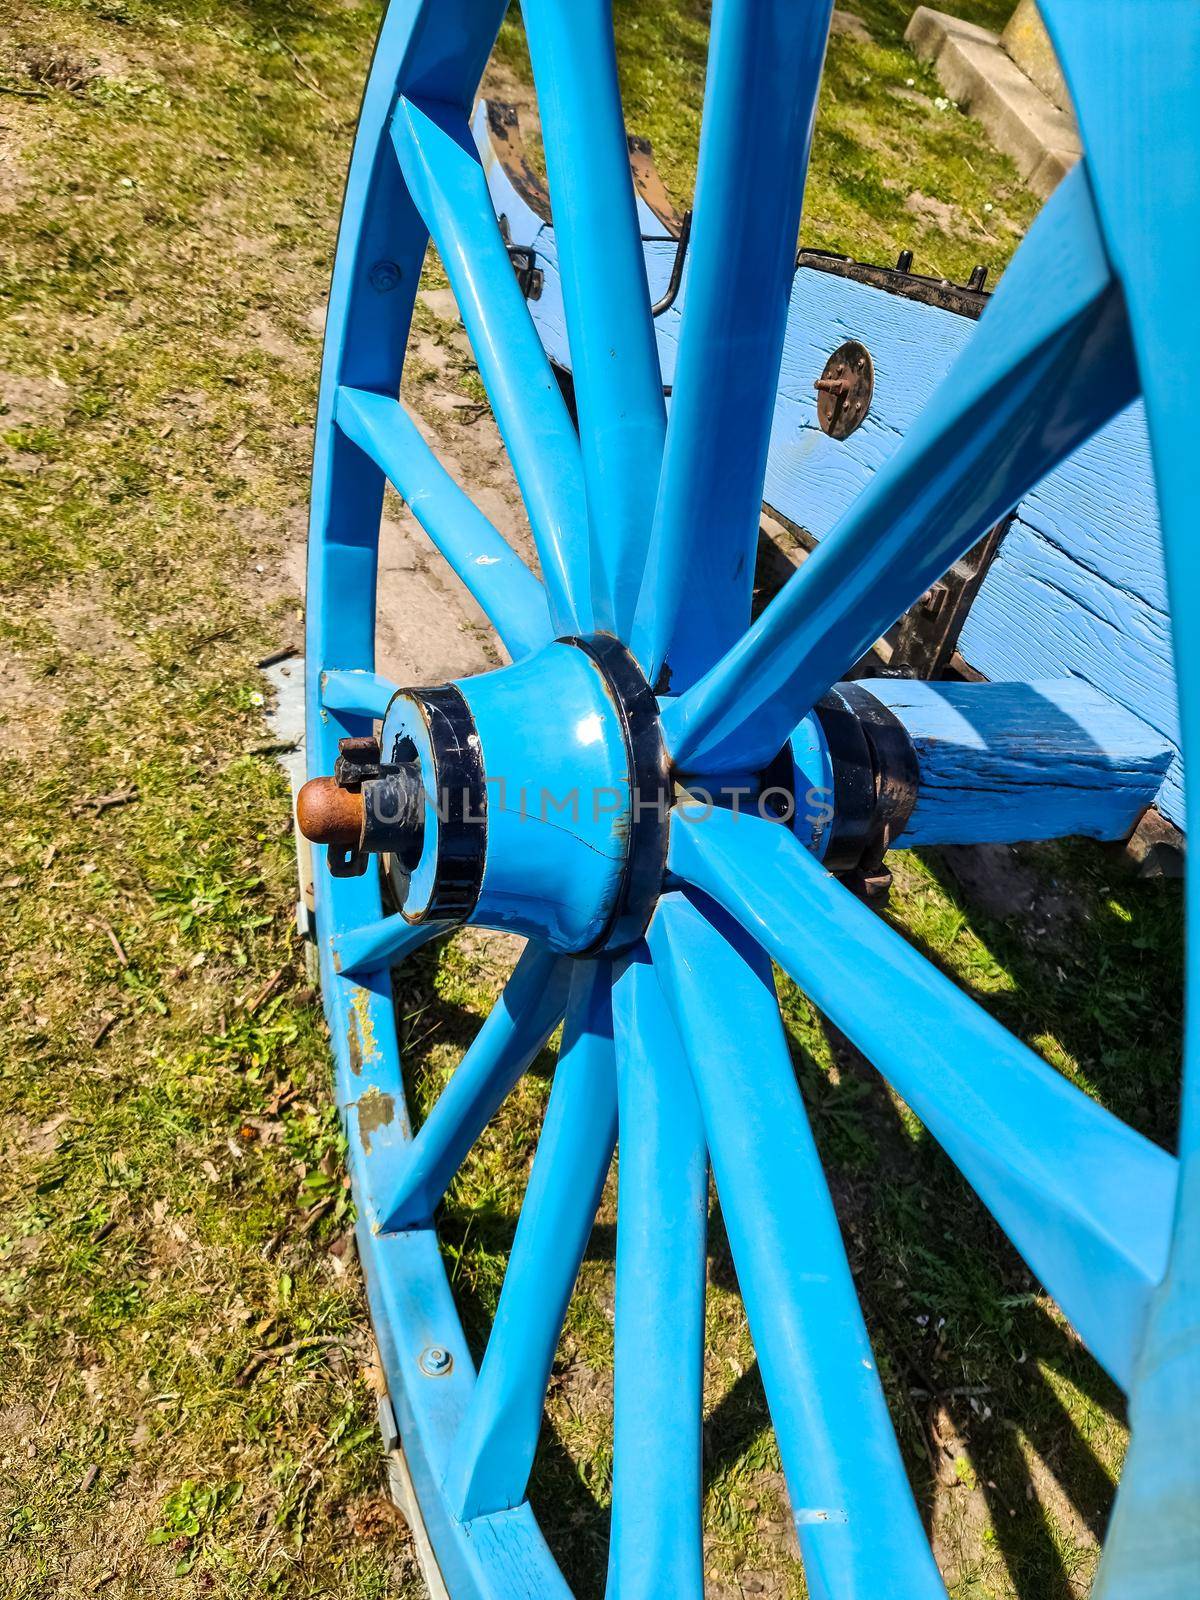 An old wooden wagon wheel in blue paint